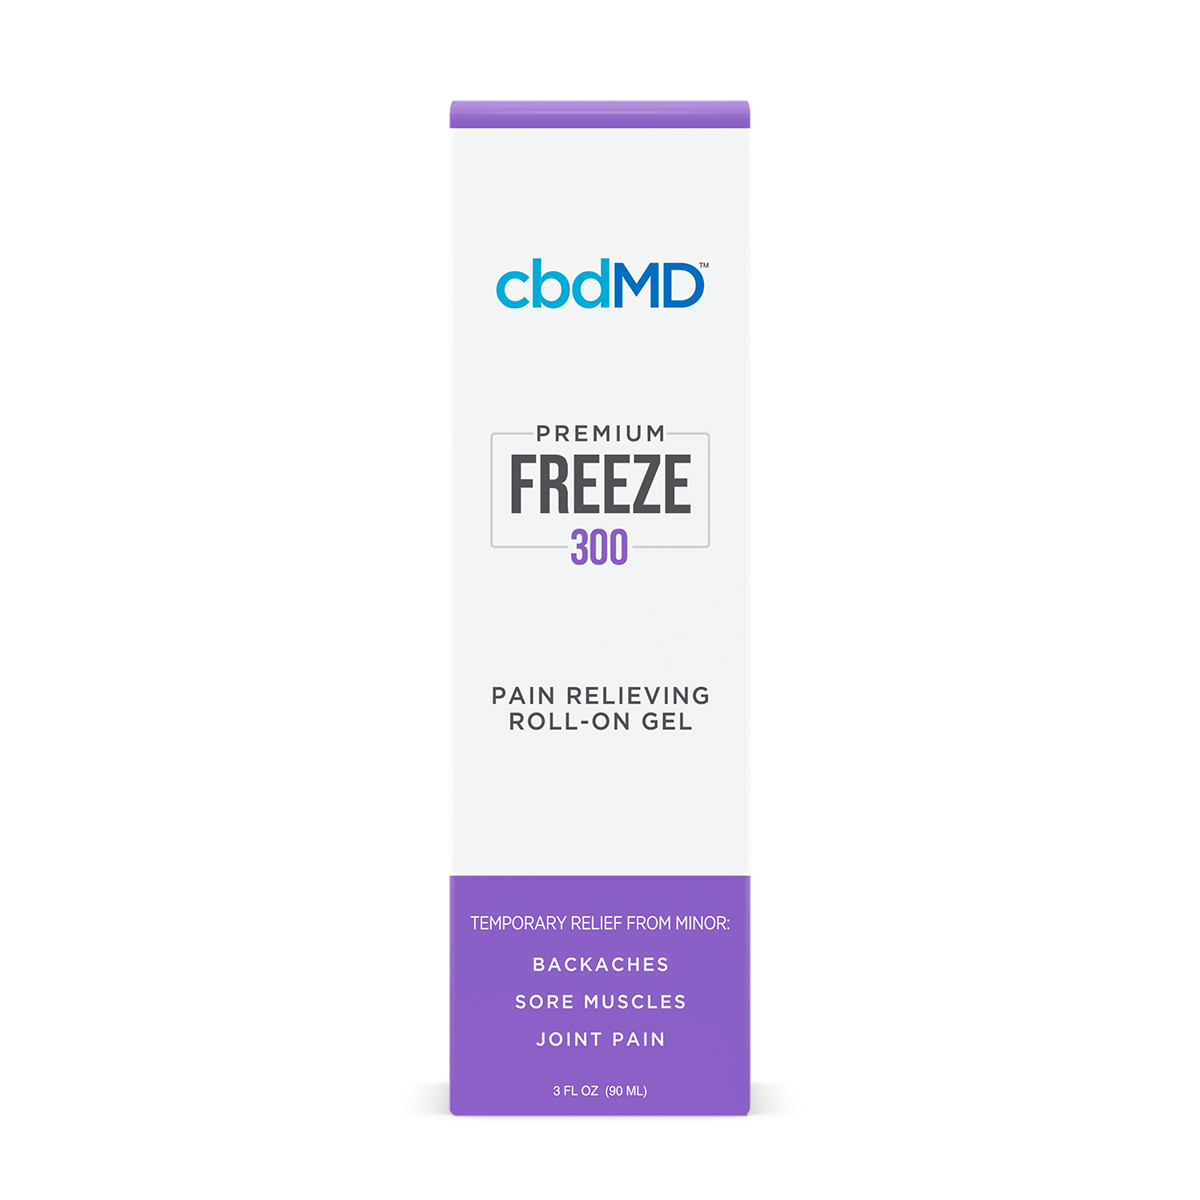 cbdMD | cbdMD FREEZE PAIN RELIEF | ROLLERS & SQUEEZE TUBES | 4 LEVELS |